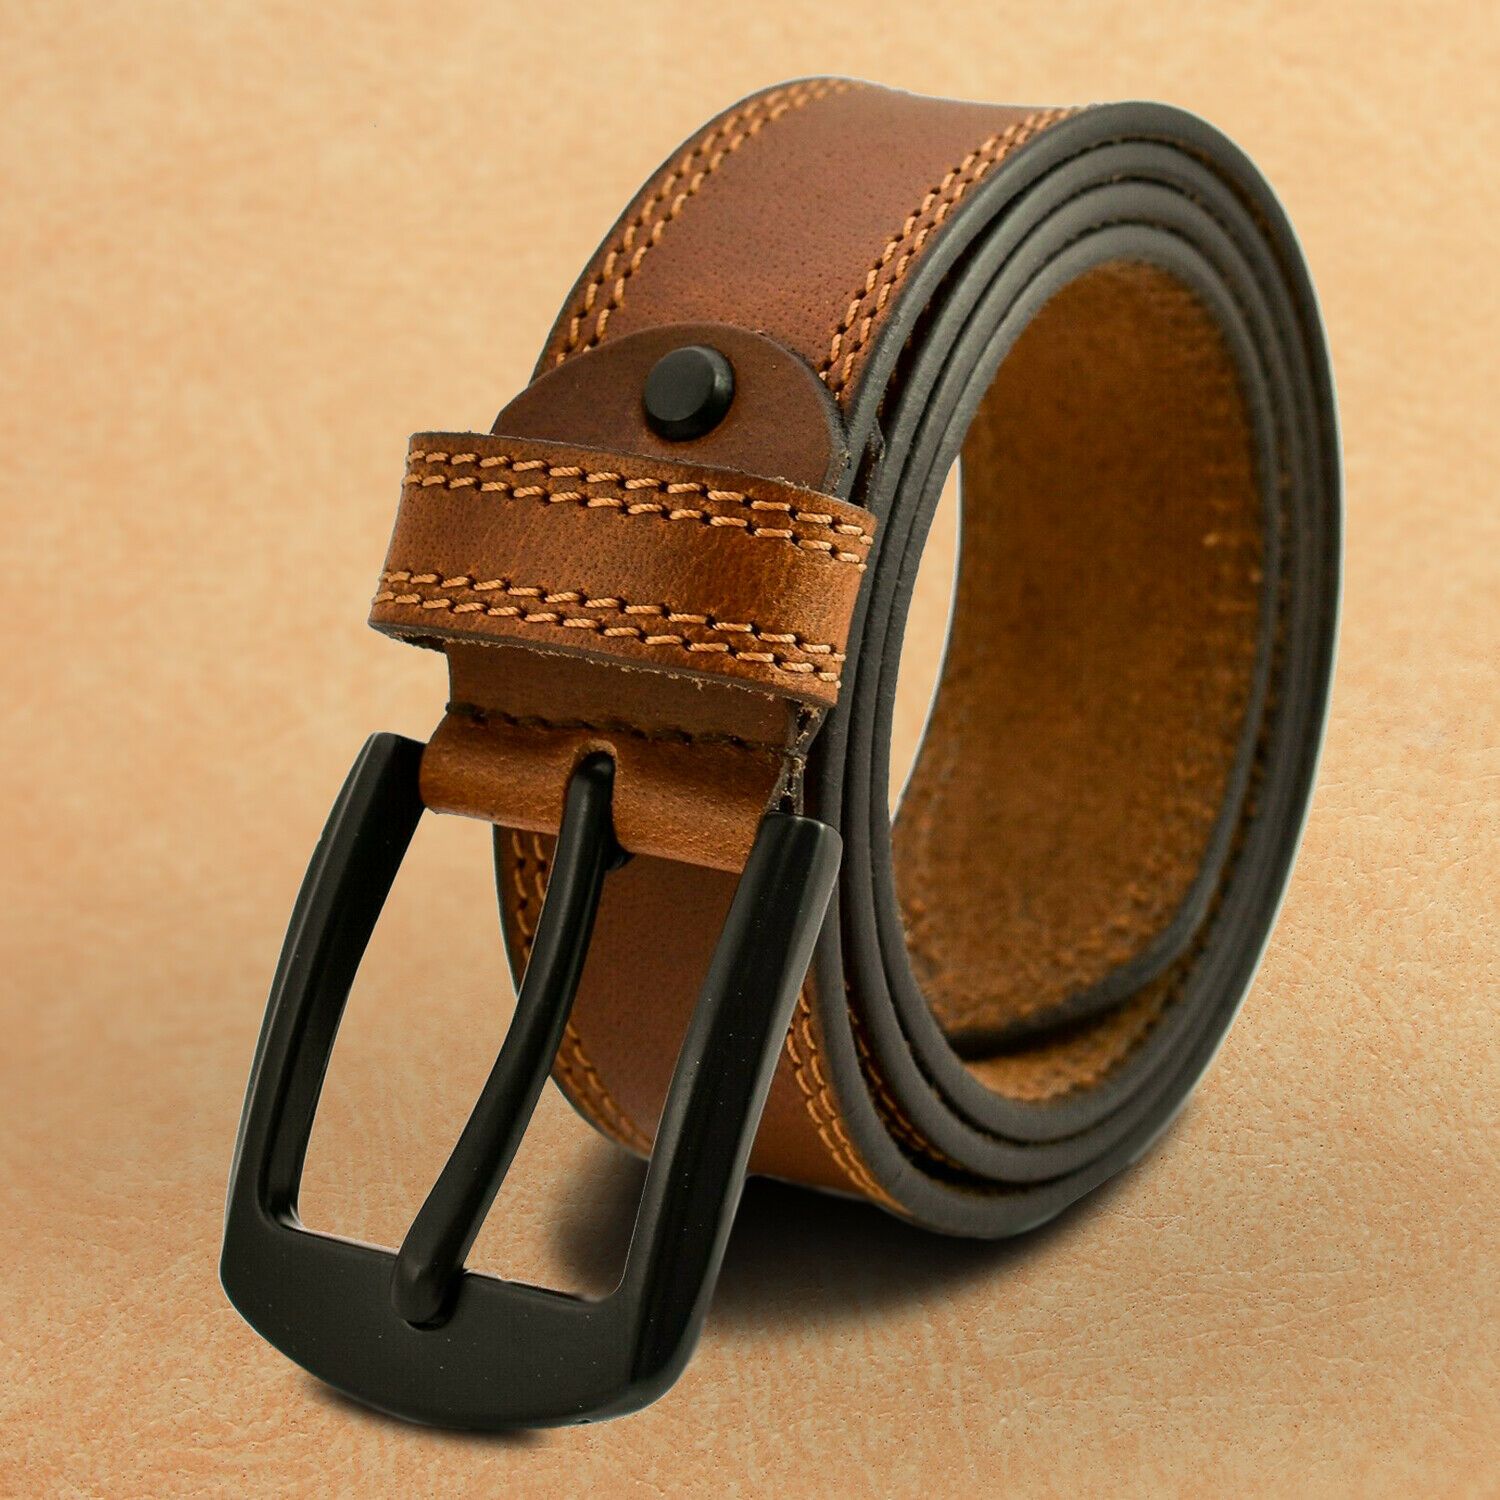 Buy Mens Leather Belts for Jeans Vintage Western Style Wide 1.5